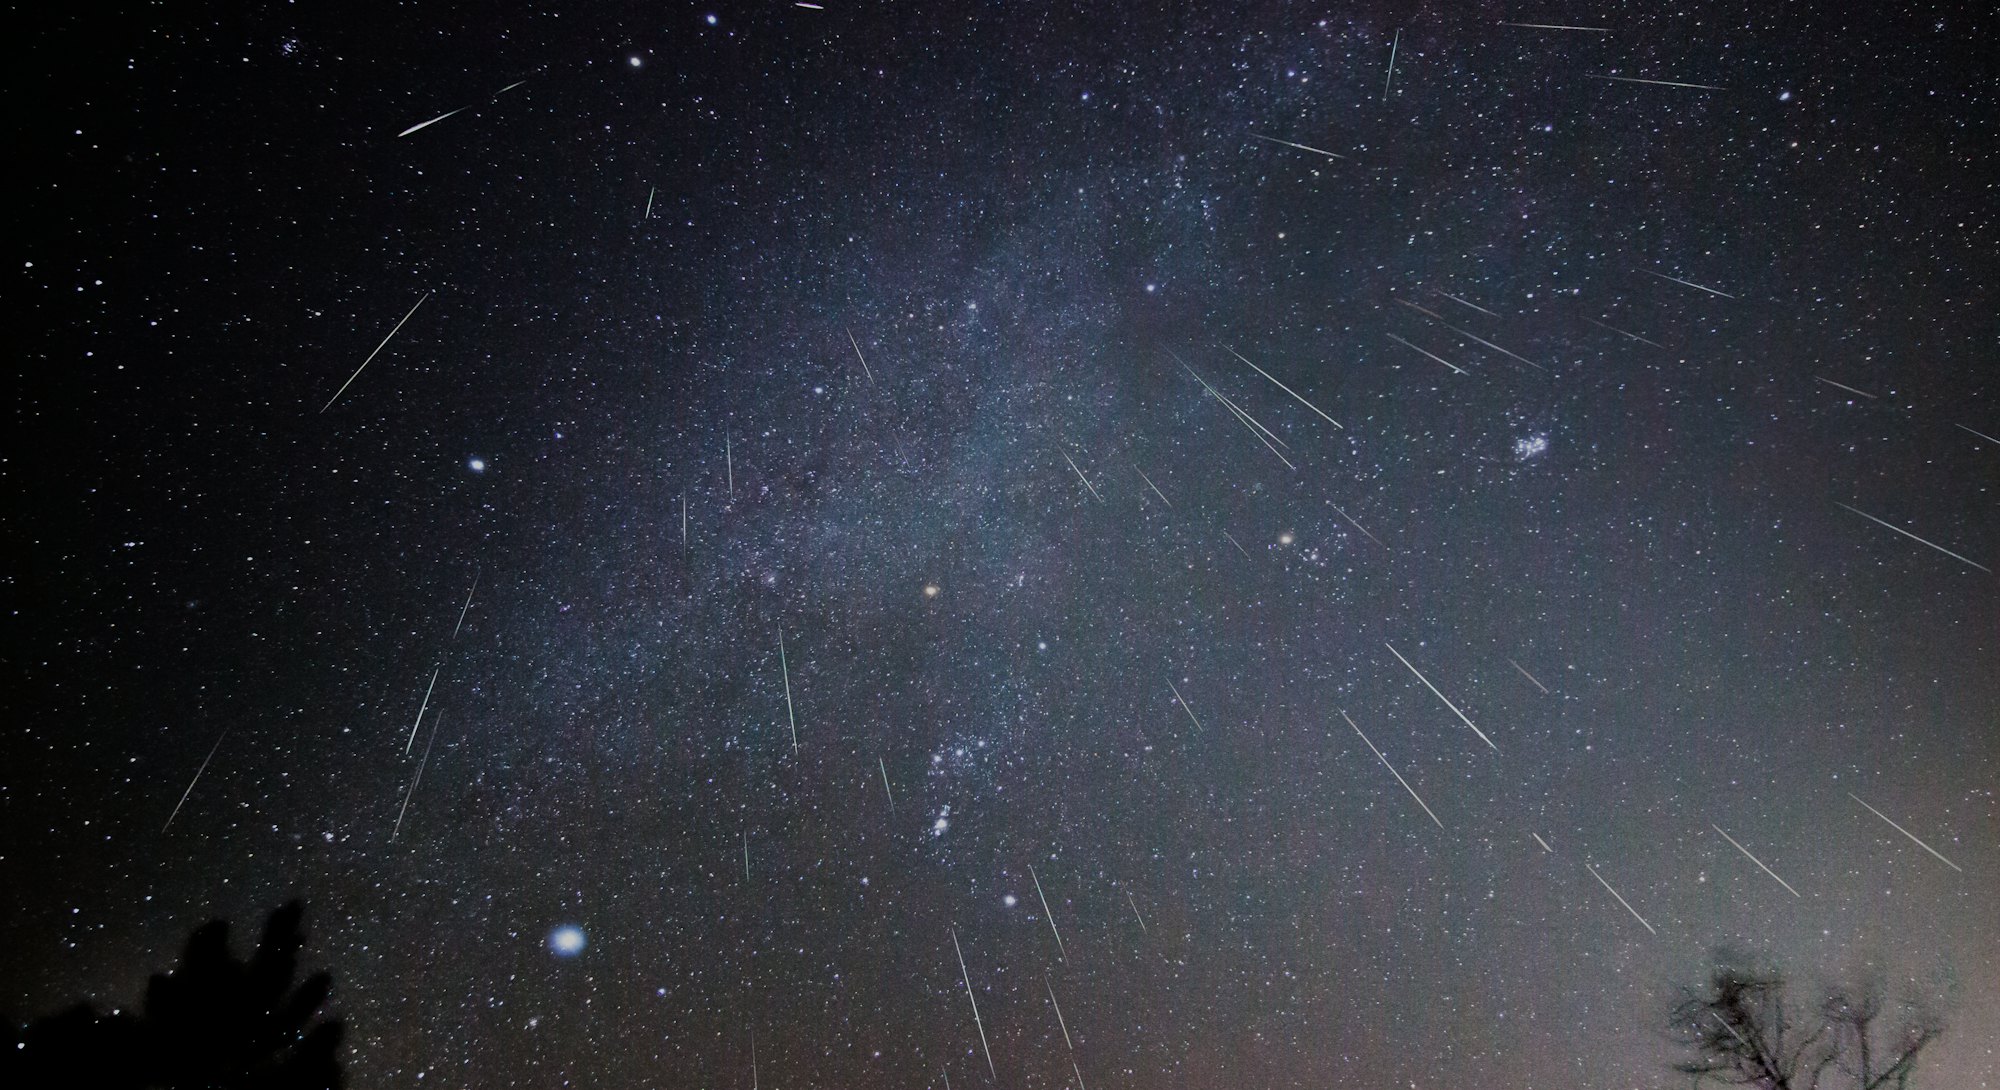 Geminid meteors shower downward in this composite image taken over several hours on a December night...